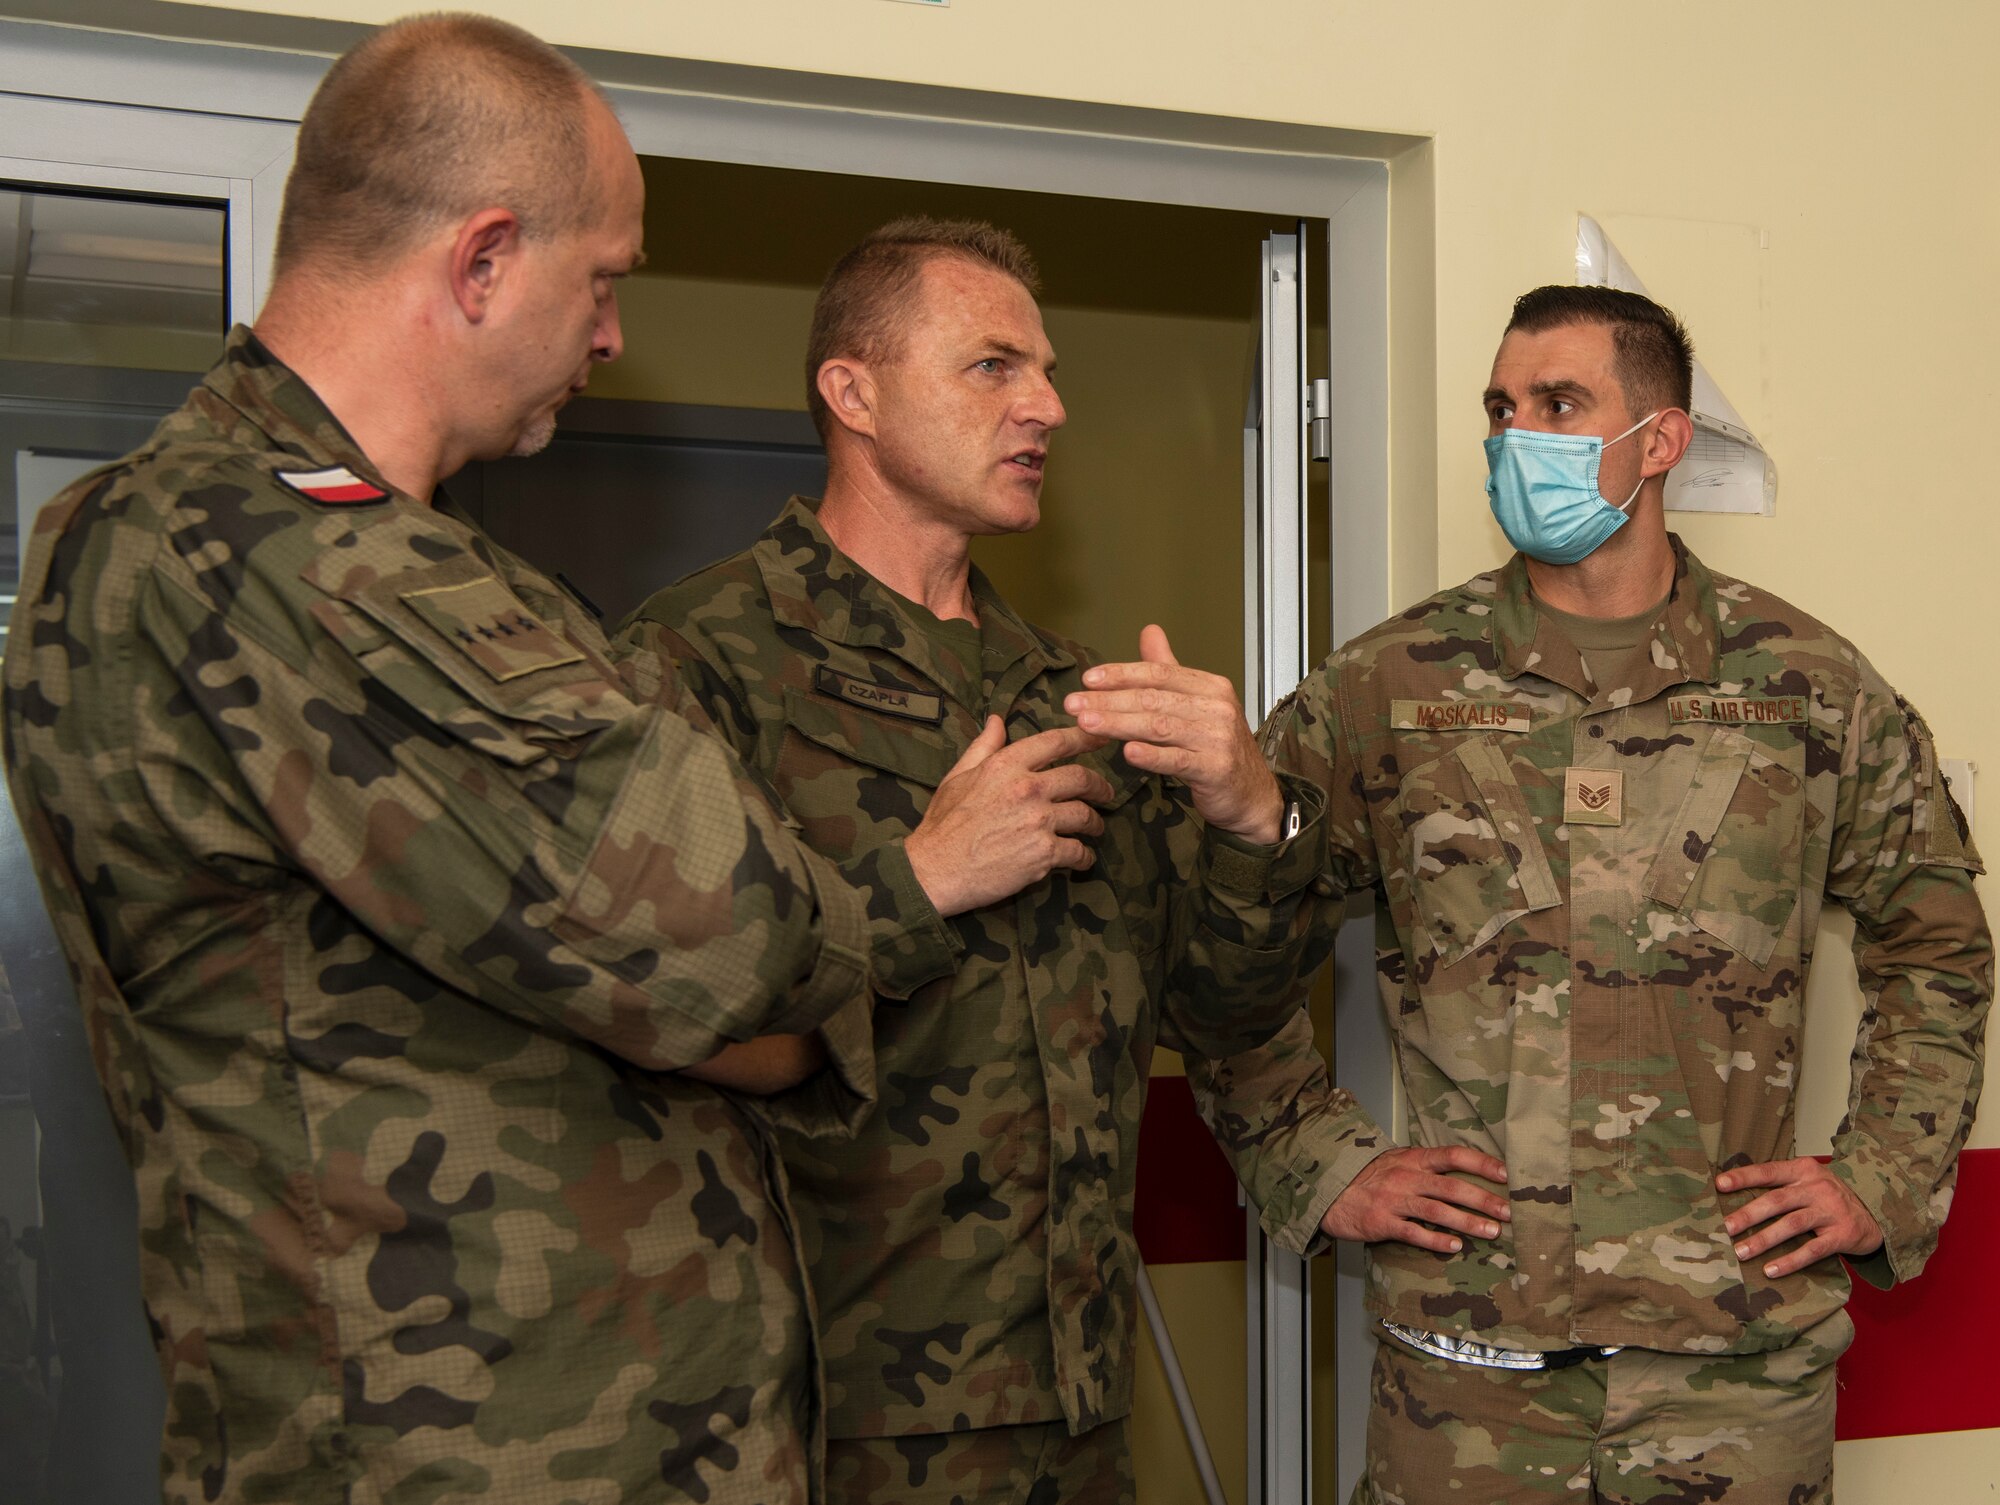 Warrant Officer Mariusz Galka, fire chief, 32nd Tactical Air Base (center), and Warrant Officer Adam Czapla, deputy fire chief, 32nd Tactical Air Base and U.S. Air Force Staff Sgt. Bernard Moskalis (right), non-destructive inspection craftsman, 480th Expeditionary Fighter Squadron, discuss emergency response with two dozen emergency responders at Łask Air Base, Poland, July 28, 2021. The meeting was in preparation of Aviation Detachment Rotation 21.3 and was designed to eliminate any confusion that could arise between U.S. service members and Polish firefighters during the exercise. (U.S. Air Force photo by Tech. Sgt. Anthony Plyler)